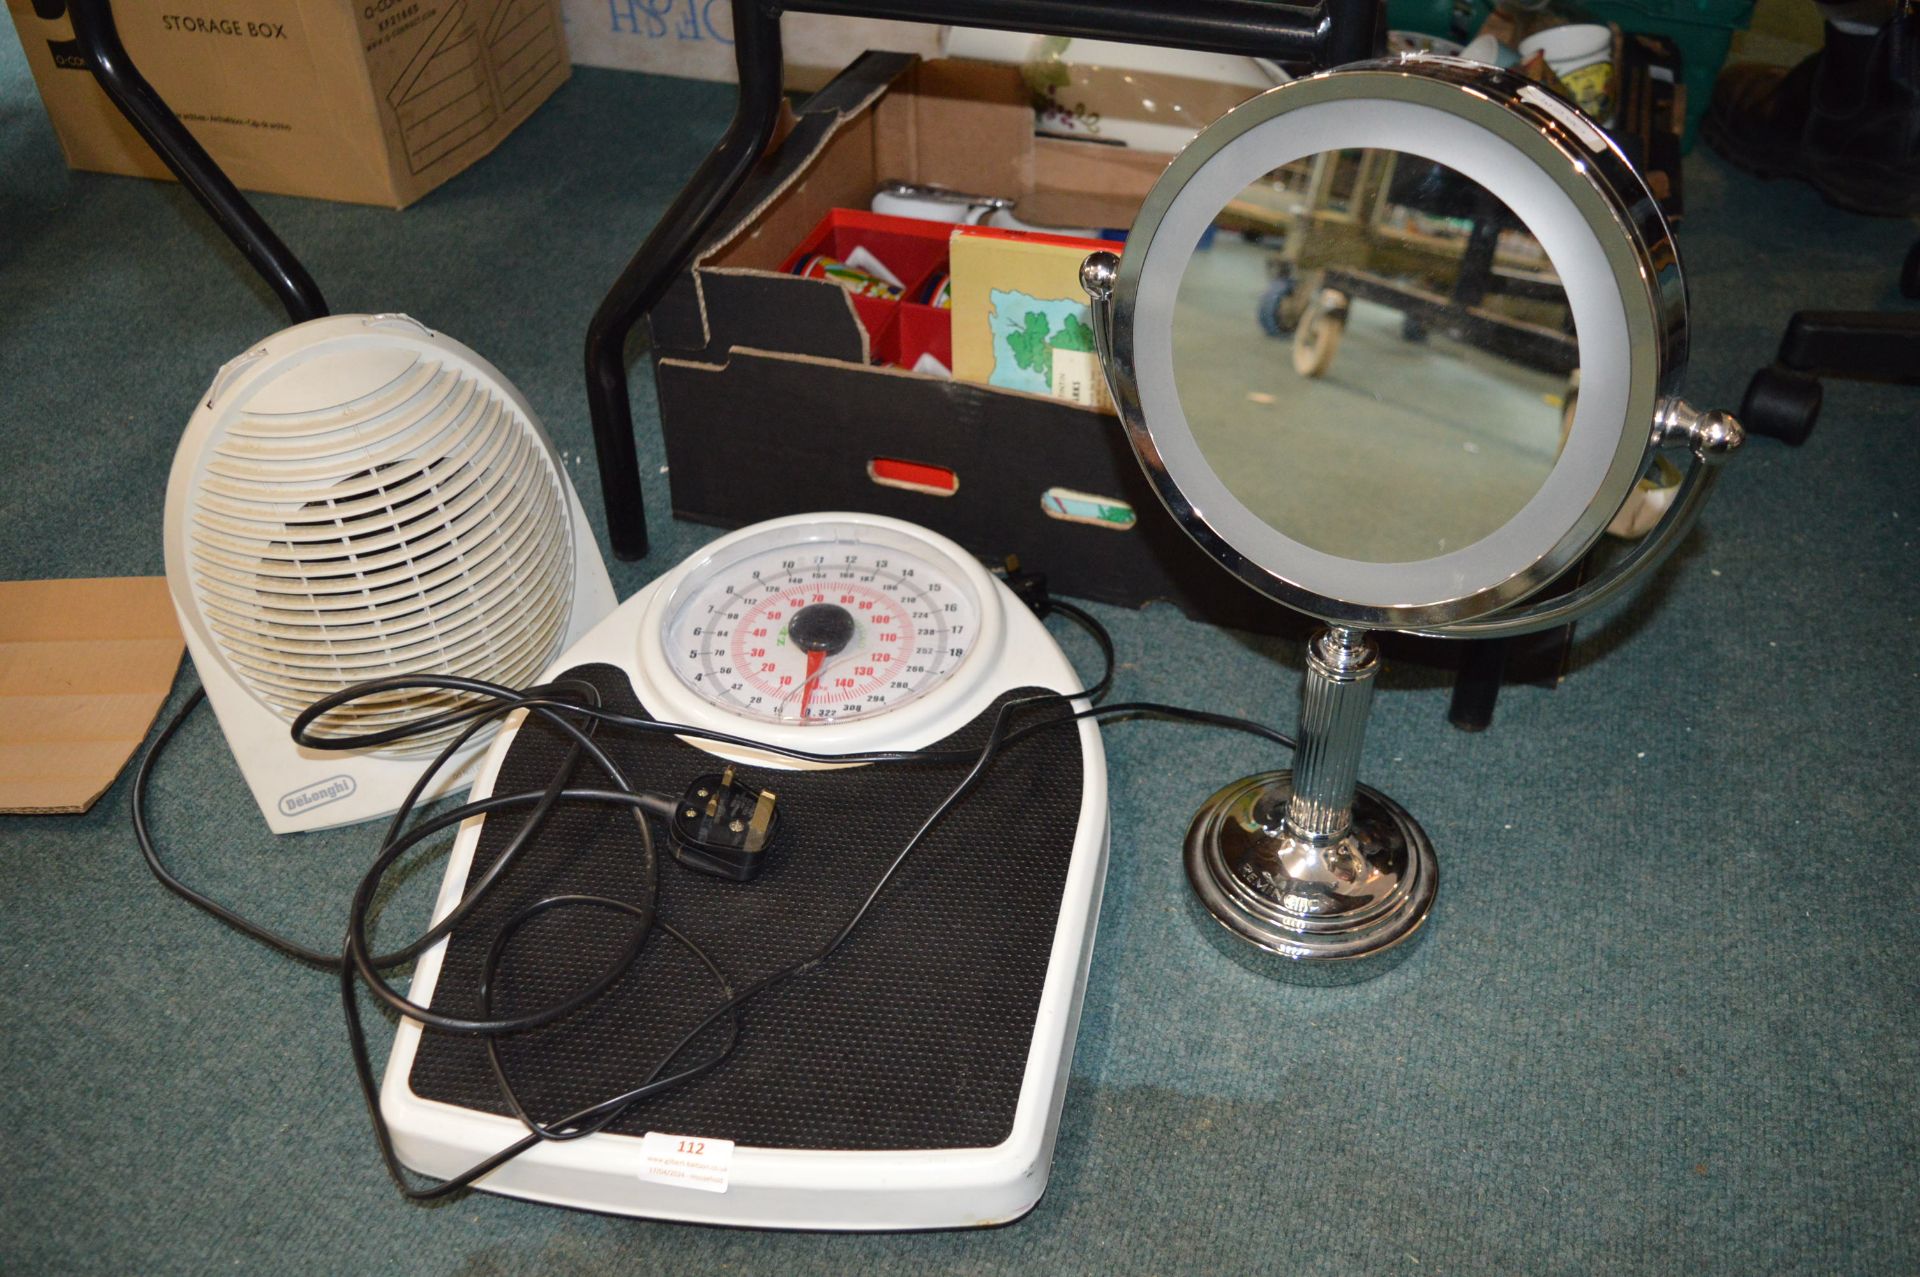 Bathroom Scales, Makeup Mirror, and Fan Heater